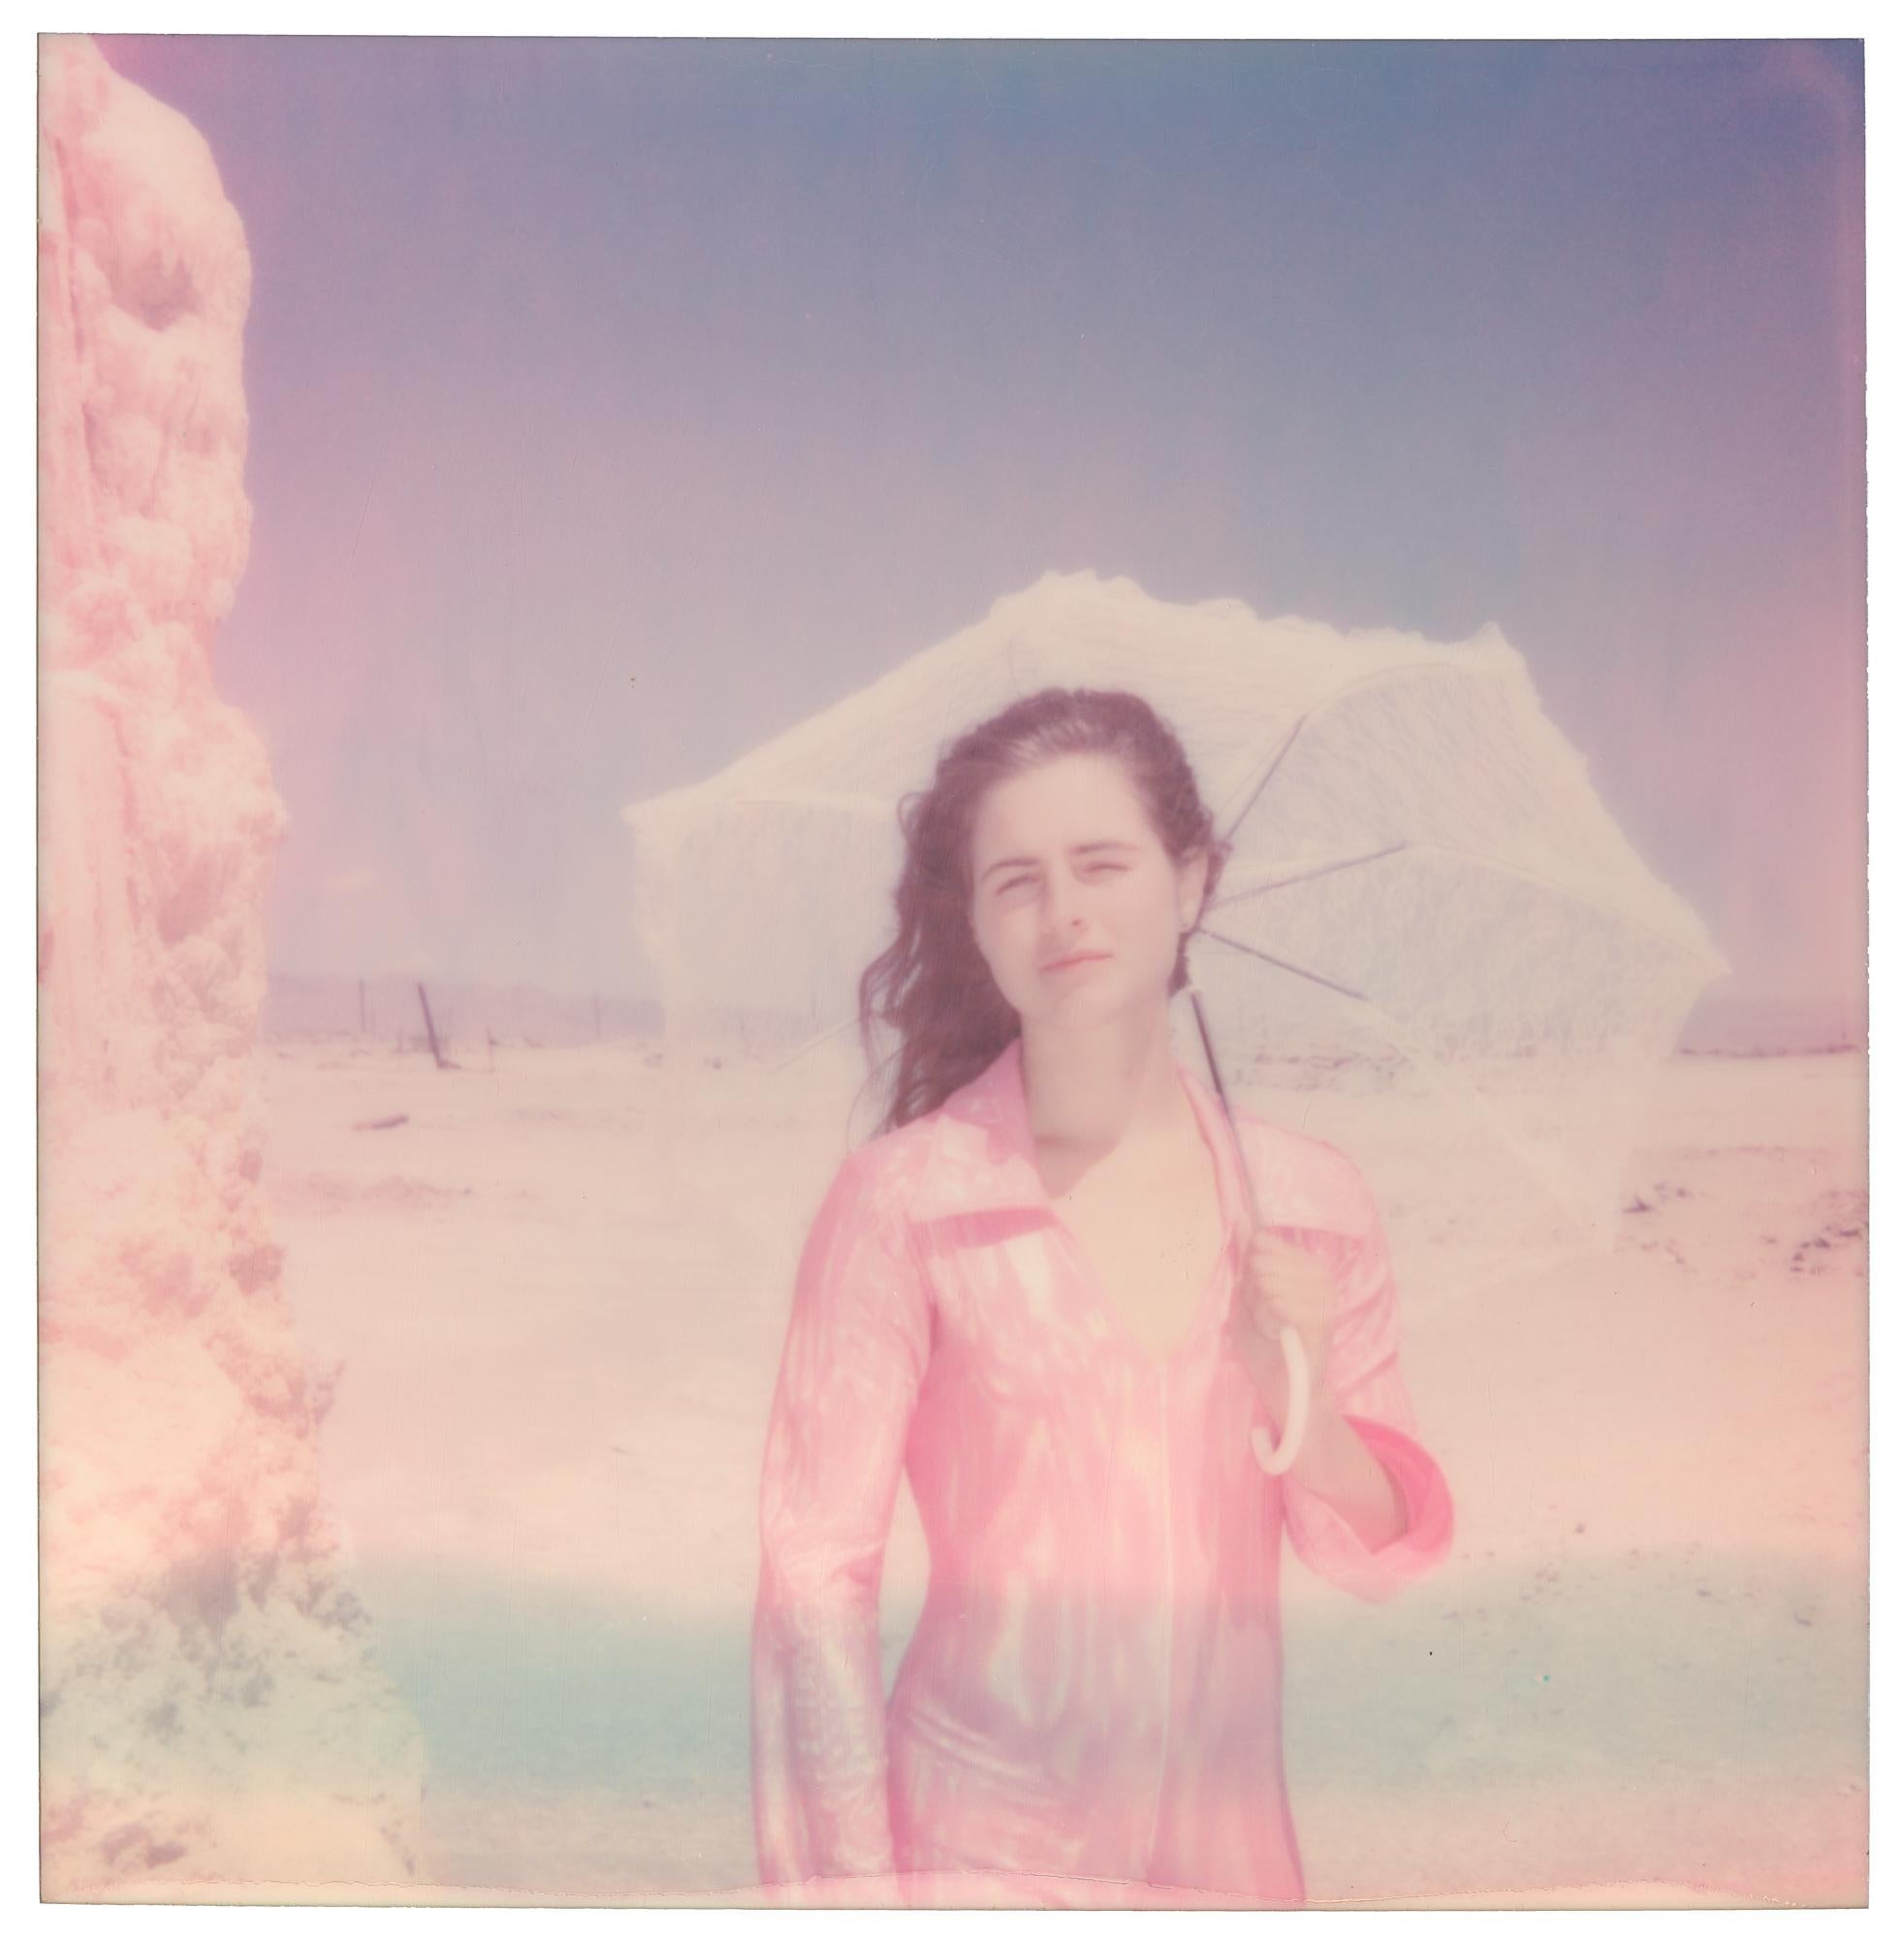 Stefanie Schneider Black and White Photograph - Pretty in Pink (Ensign Broderick record Shoot 'Blood Crush') - Bombay Beach, CA